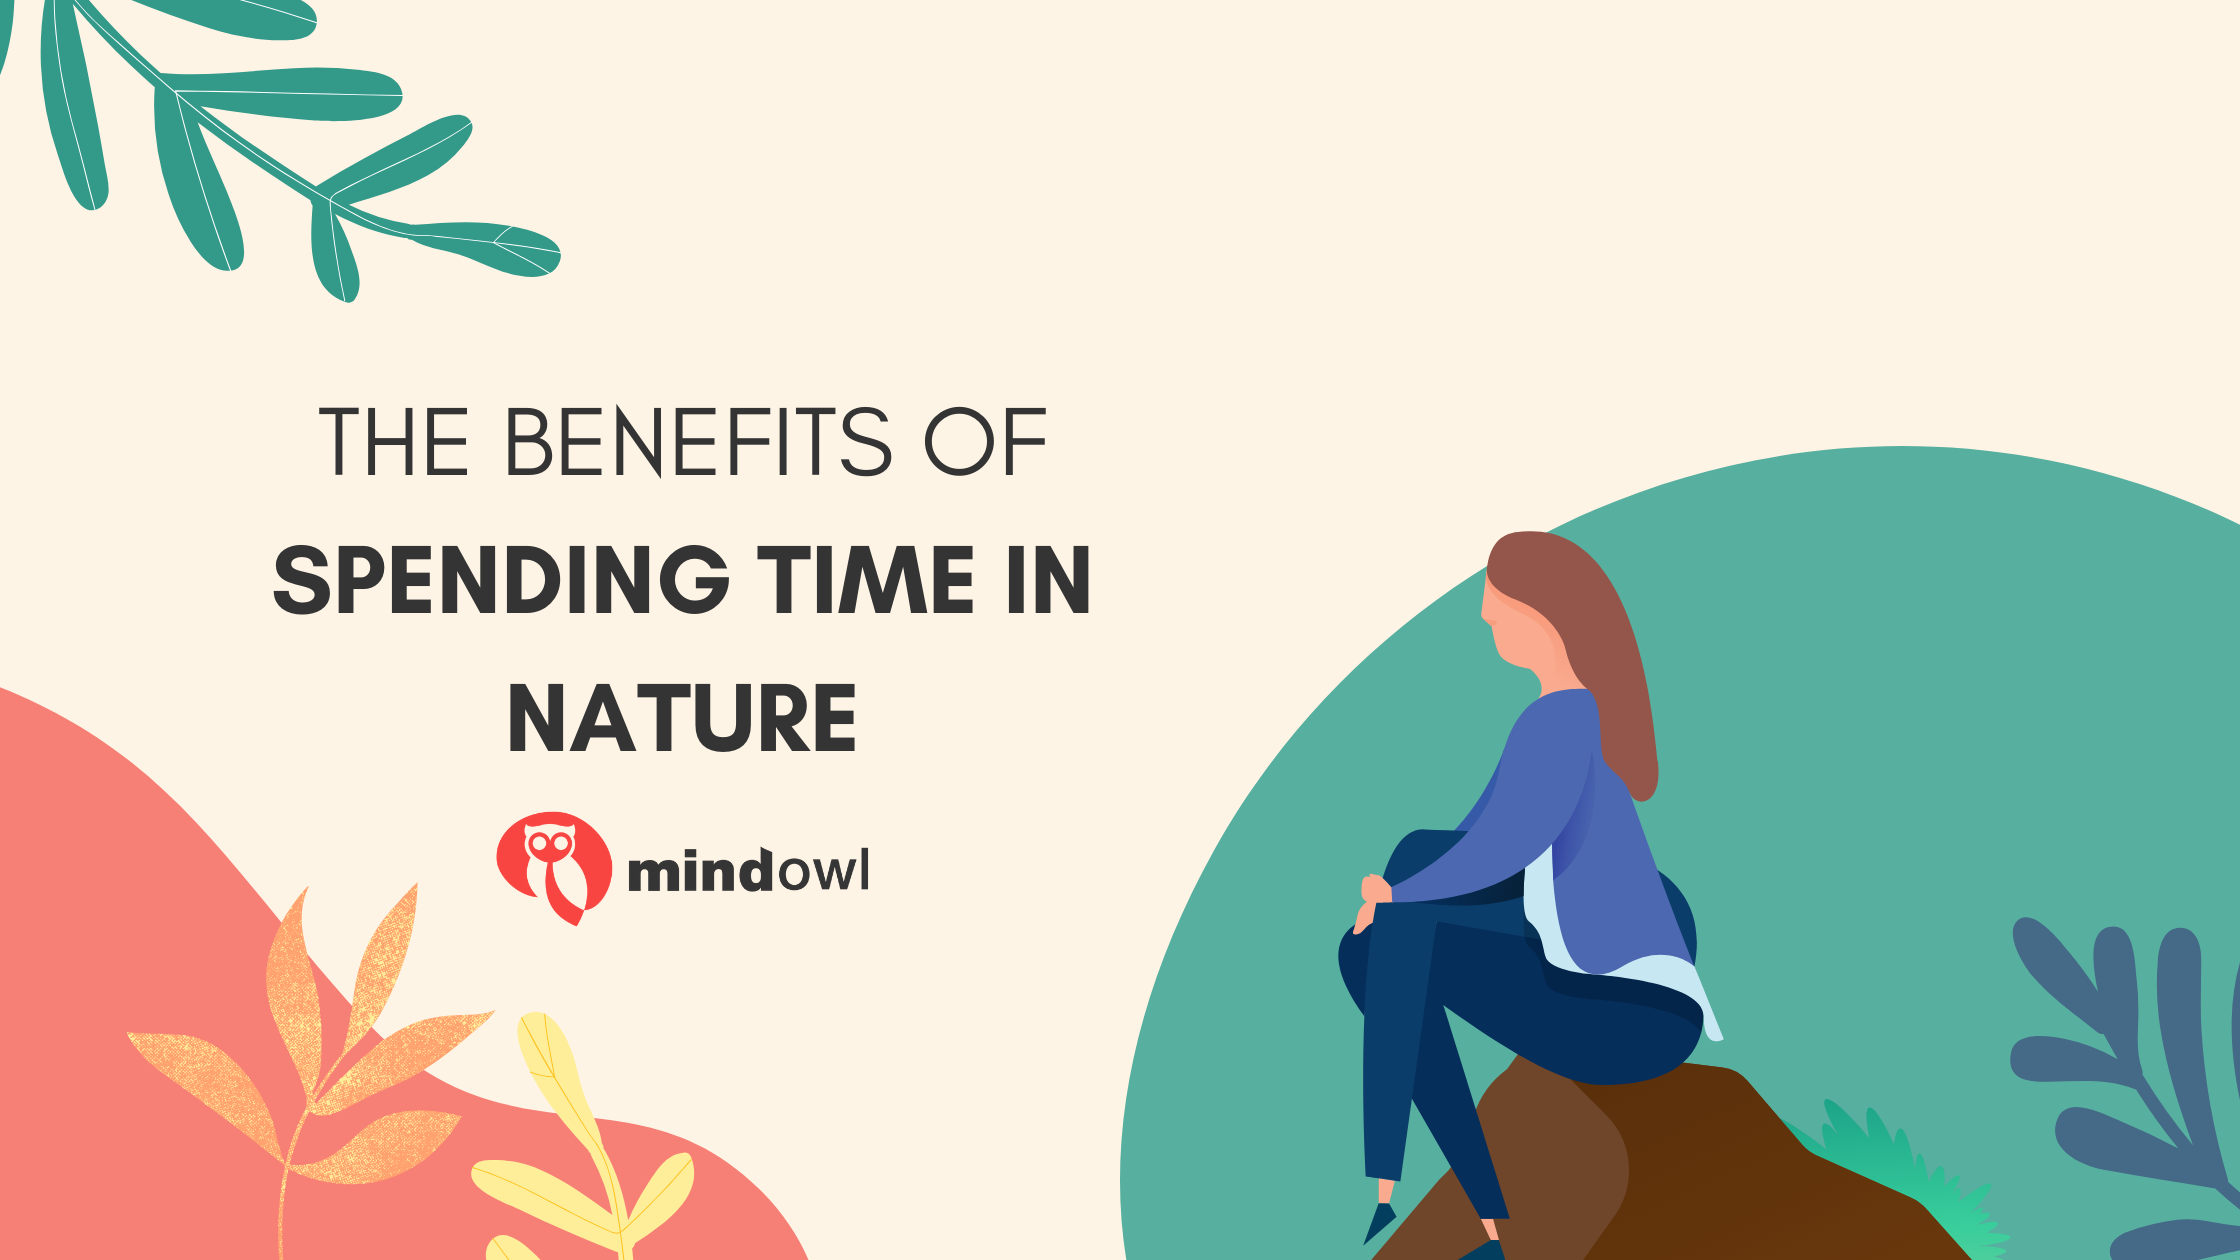 The benefits of spending time in nature